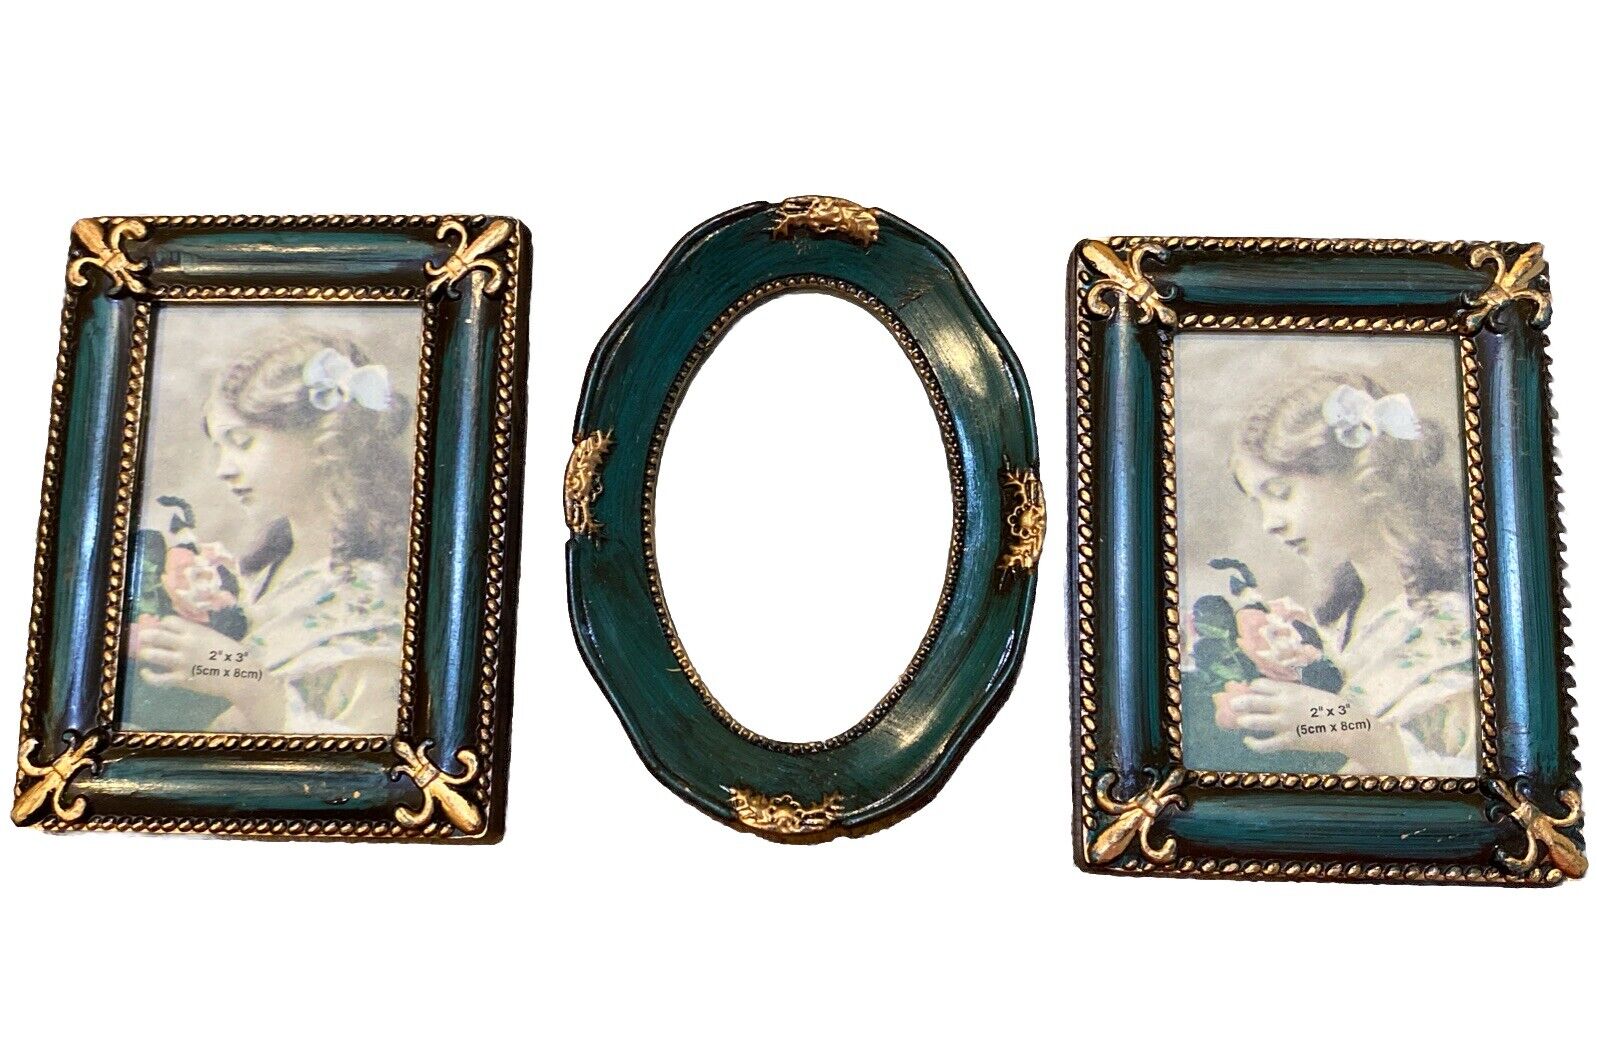 Vintage Small Green Photo Frame Lot Of 3 Frames